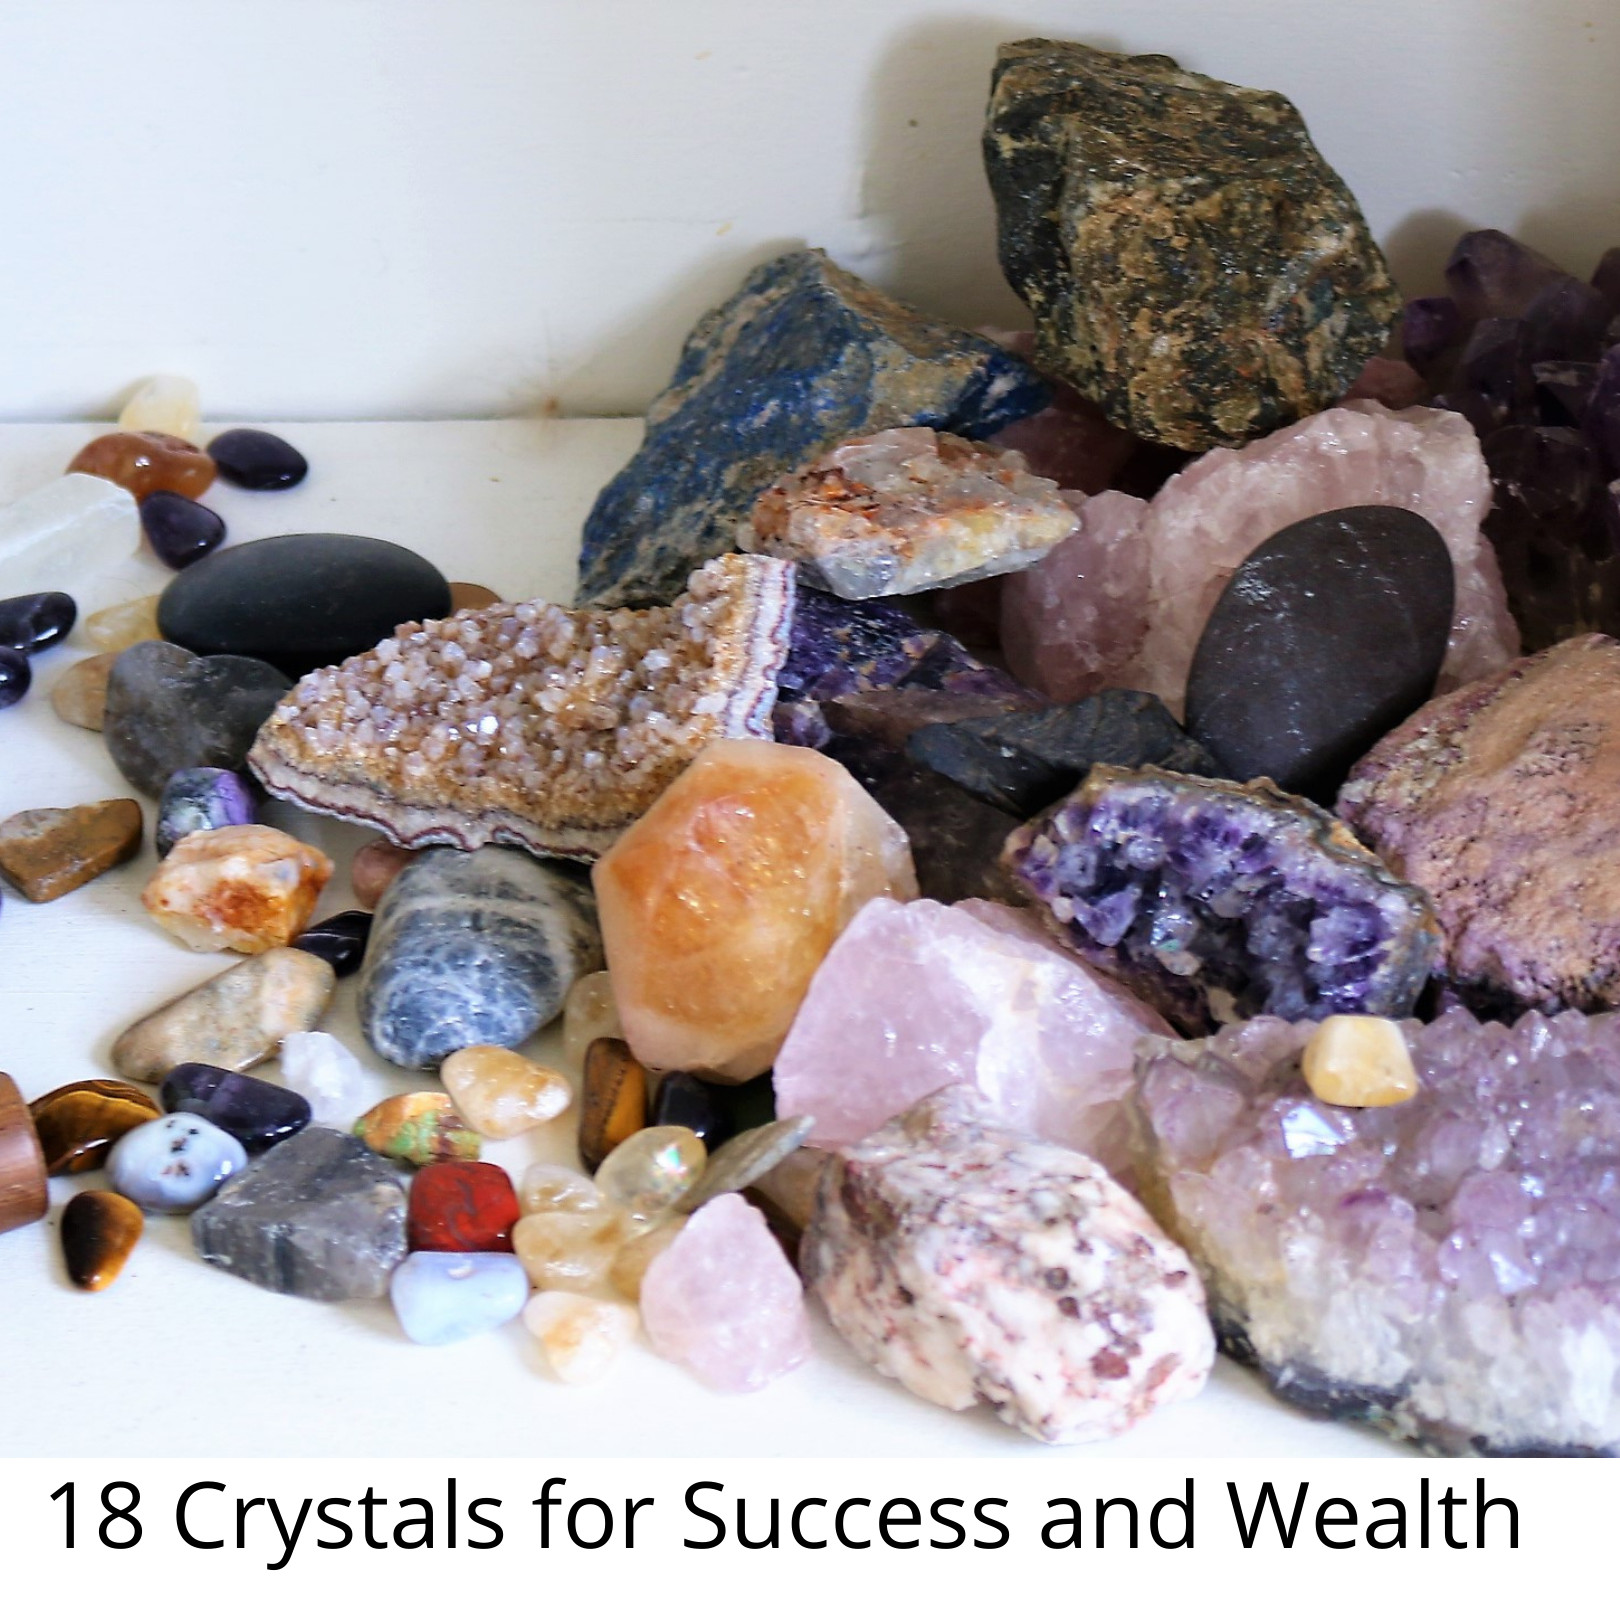 Crystals for Success and Wealth